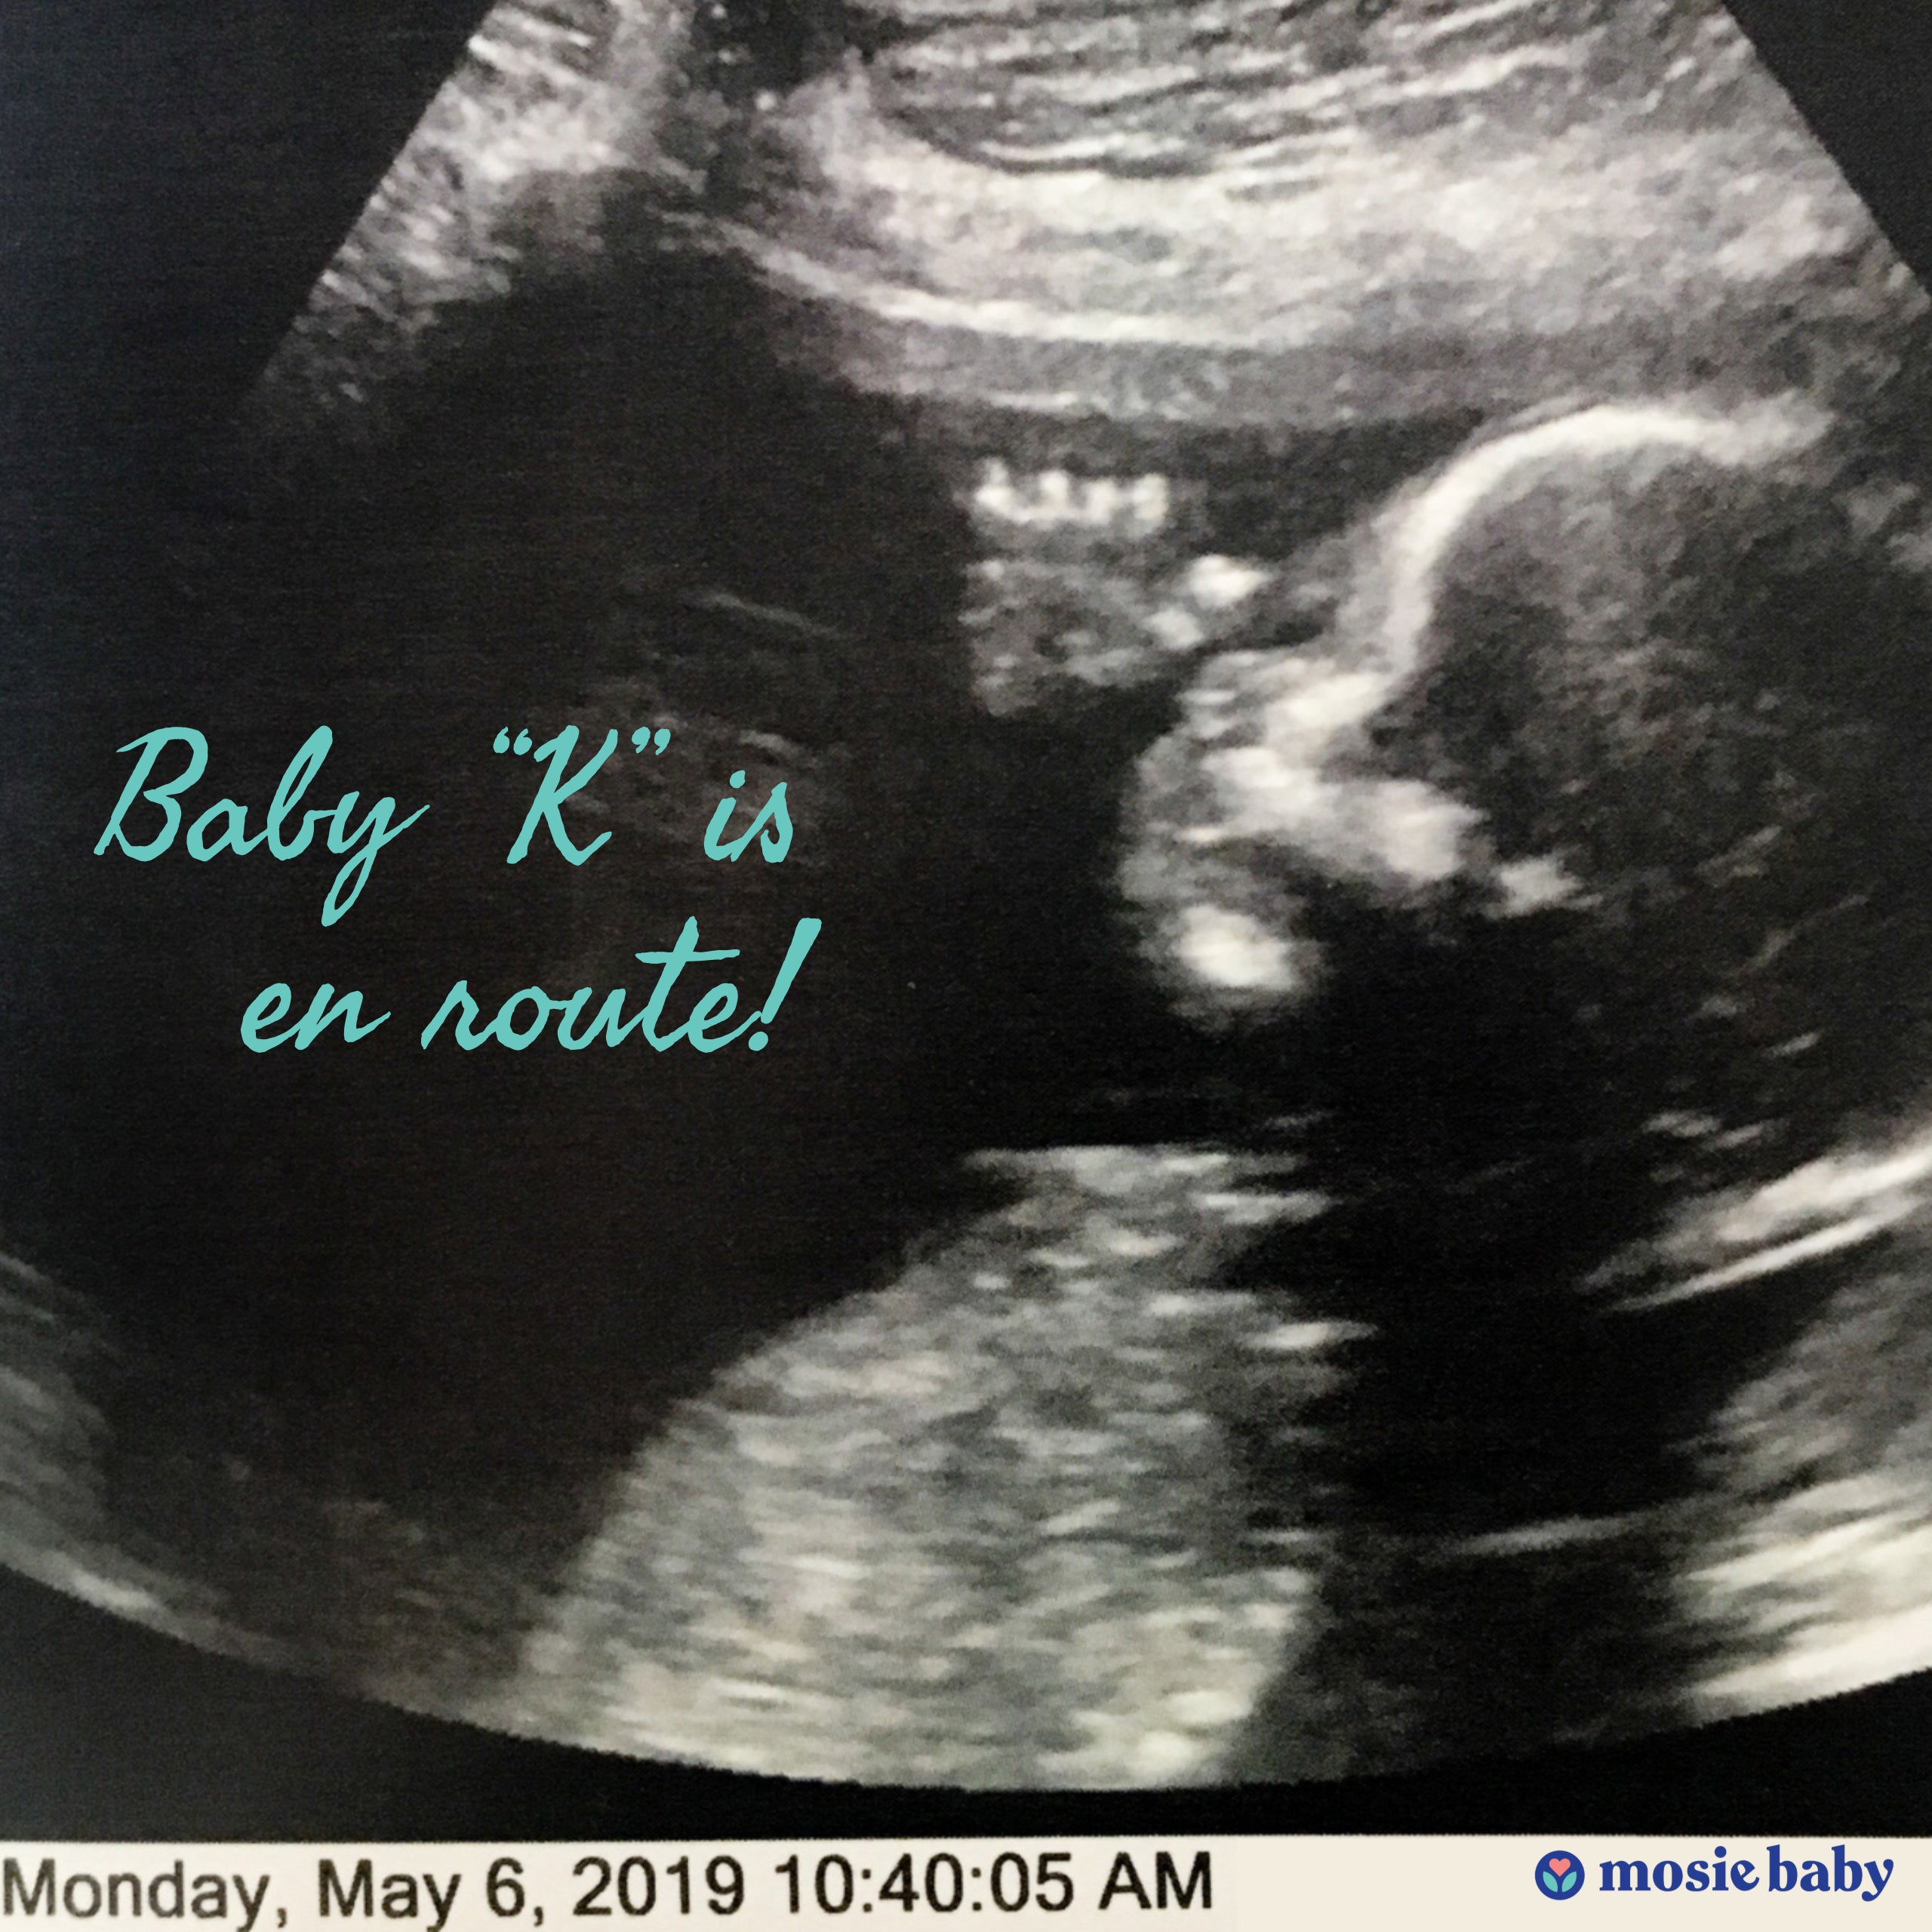 a sonogram of a mosie baby